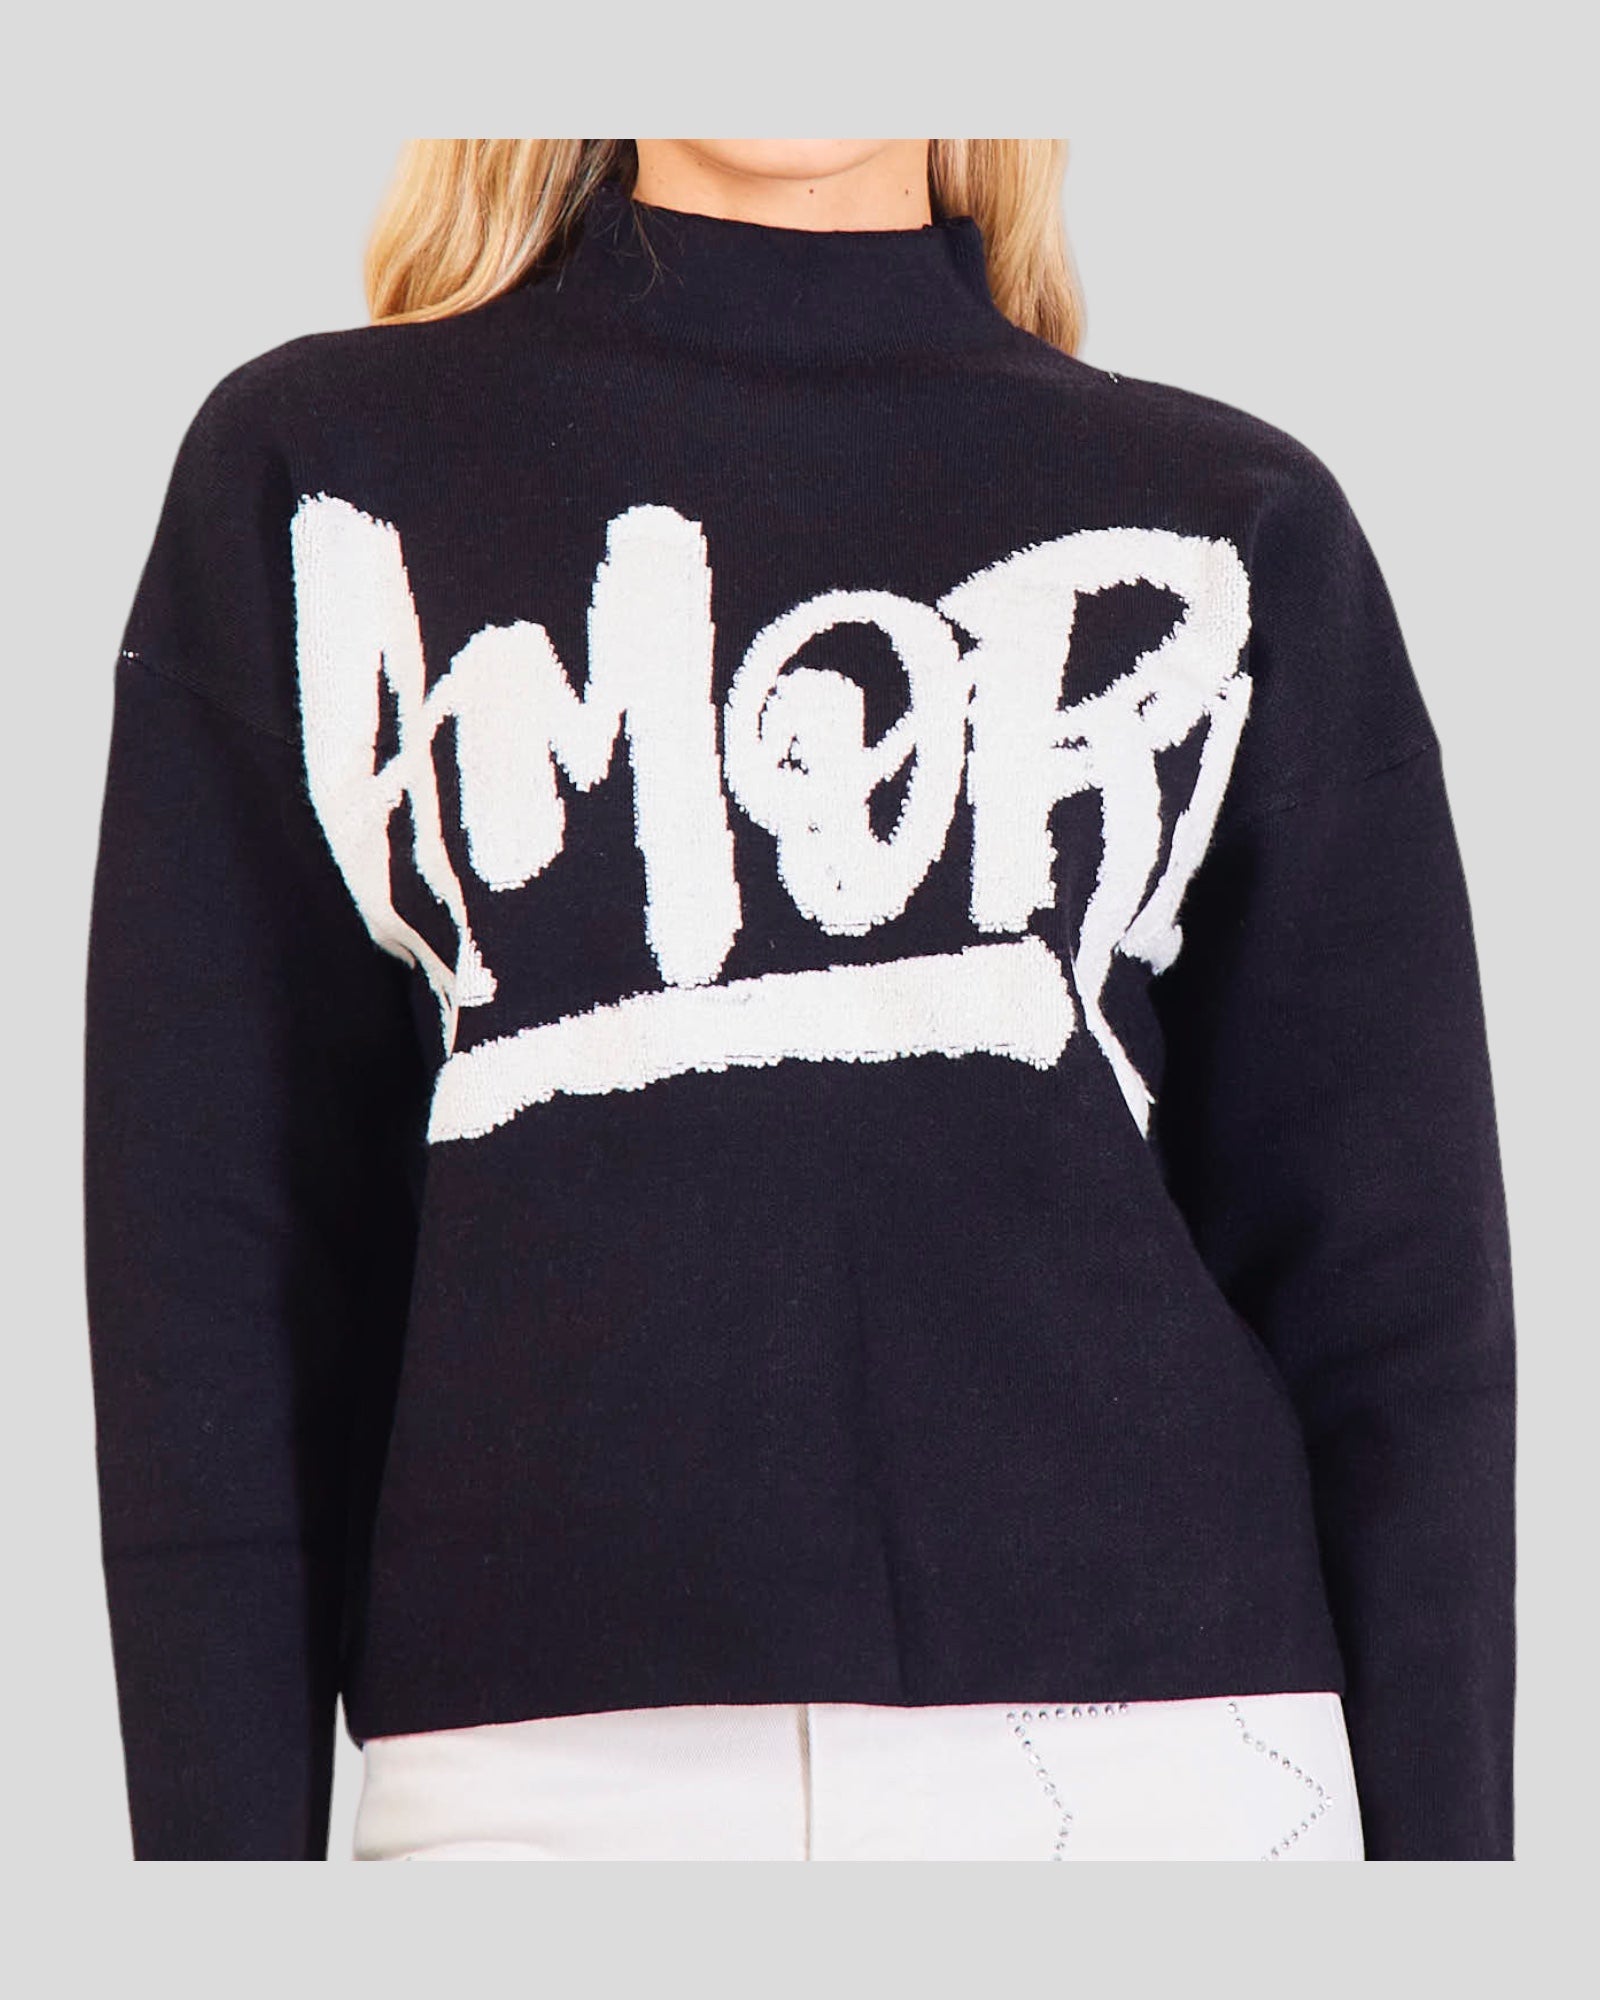 Sporty Sweater designed for dynamic style and chic comfort. Featuring large 'Amor' writing on the front, this sweater makes a bold statement. The slightly high collar adds a modern twist while ensuring coziness. 